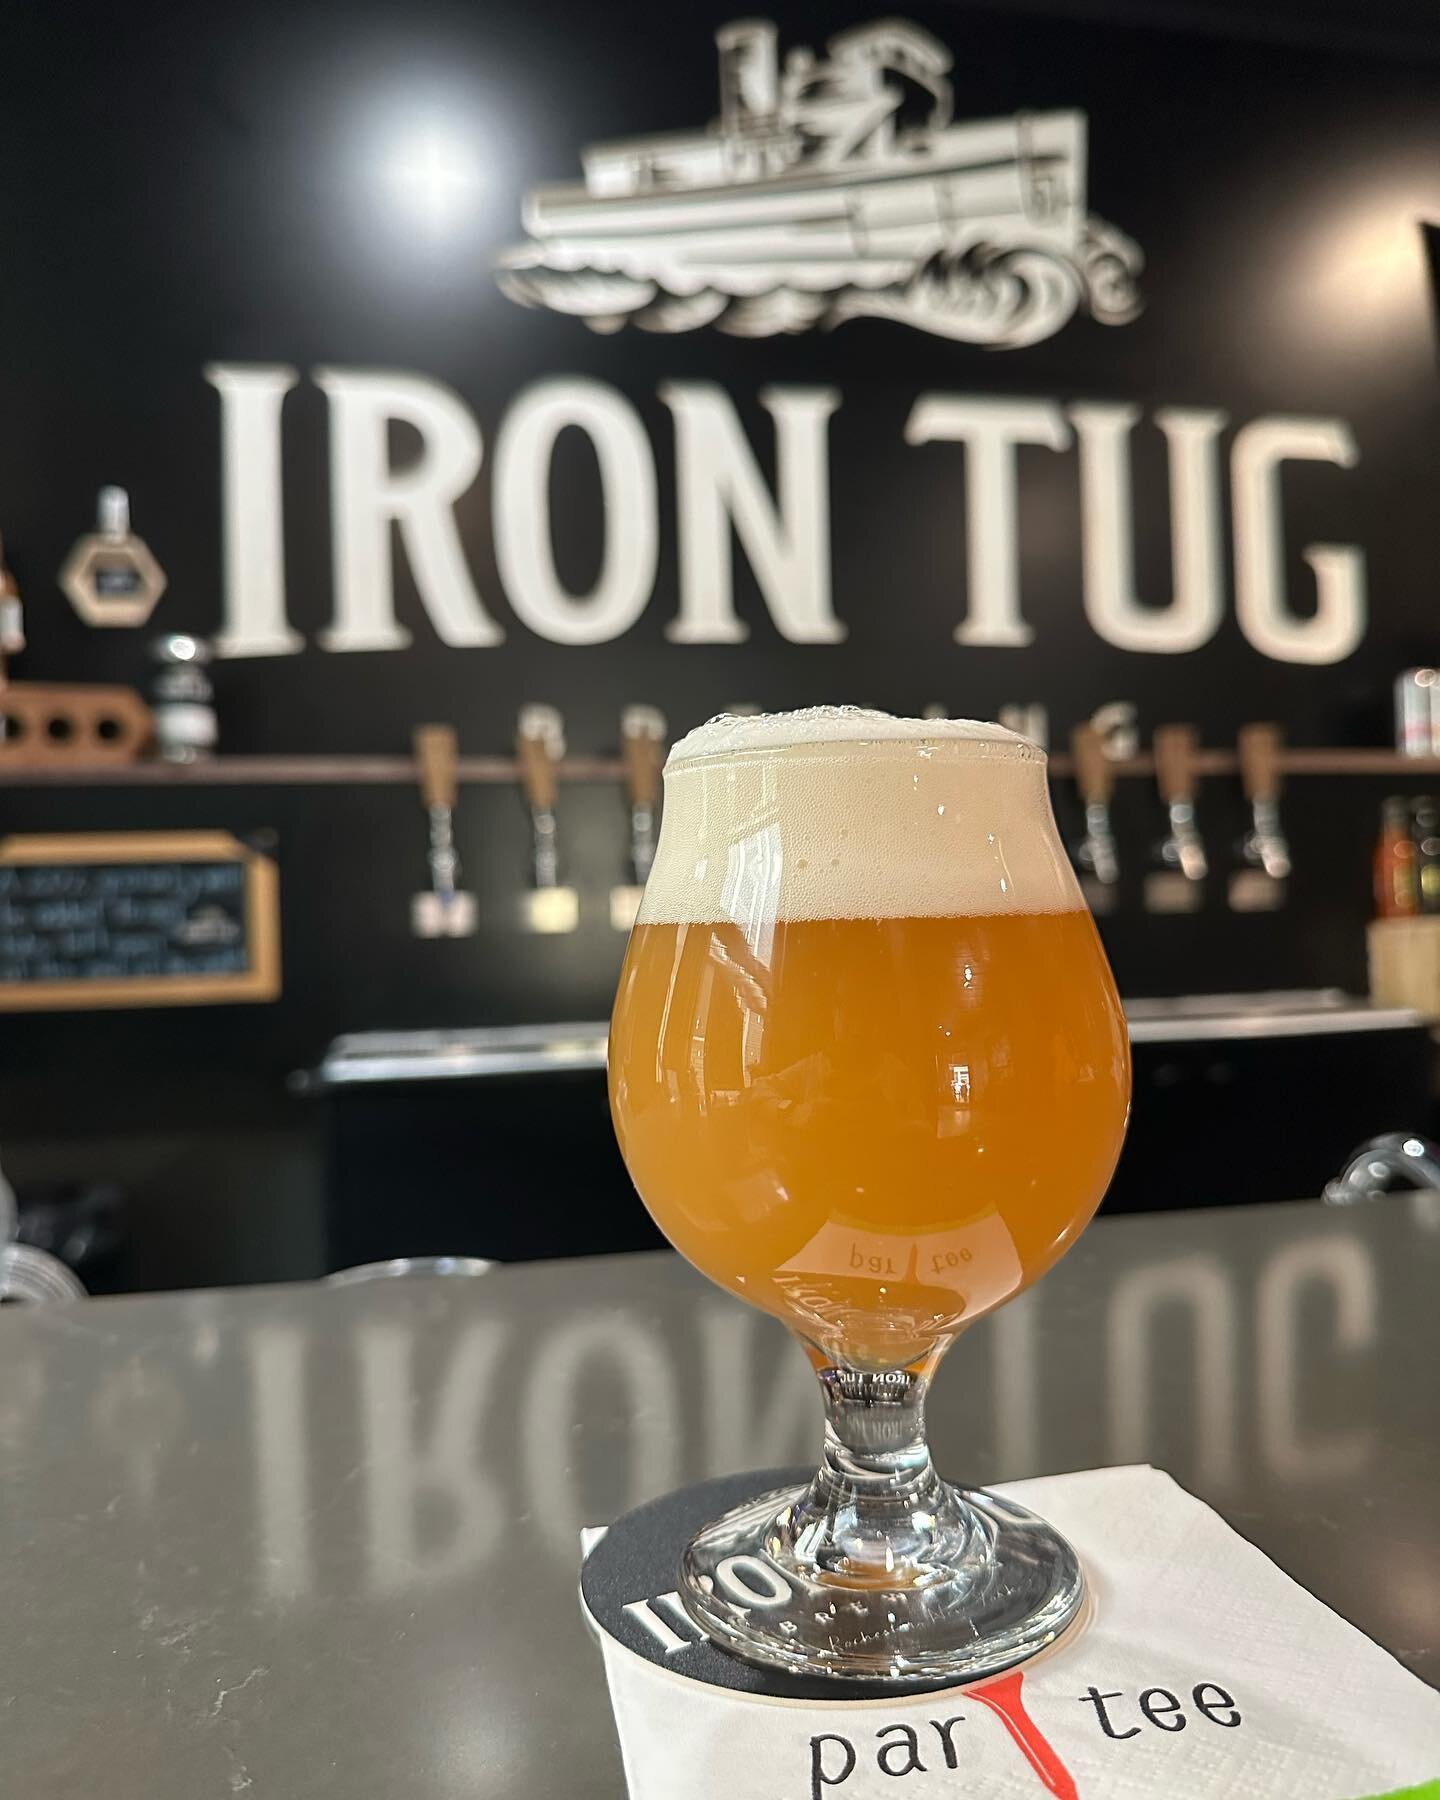 Open at 3 to get the Par-Tee started! ⛳️

&bull;
#rochesterny #parkaverochesterny #craftbeer #craftbeerlife
#craftbeerlover #drinkcraft #beer #irontugbrewing